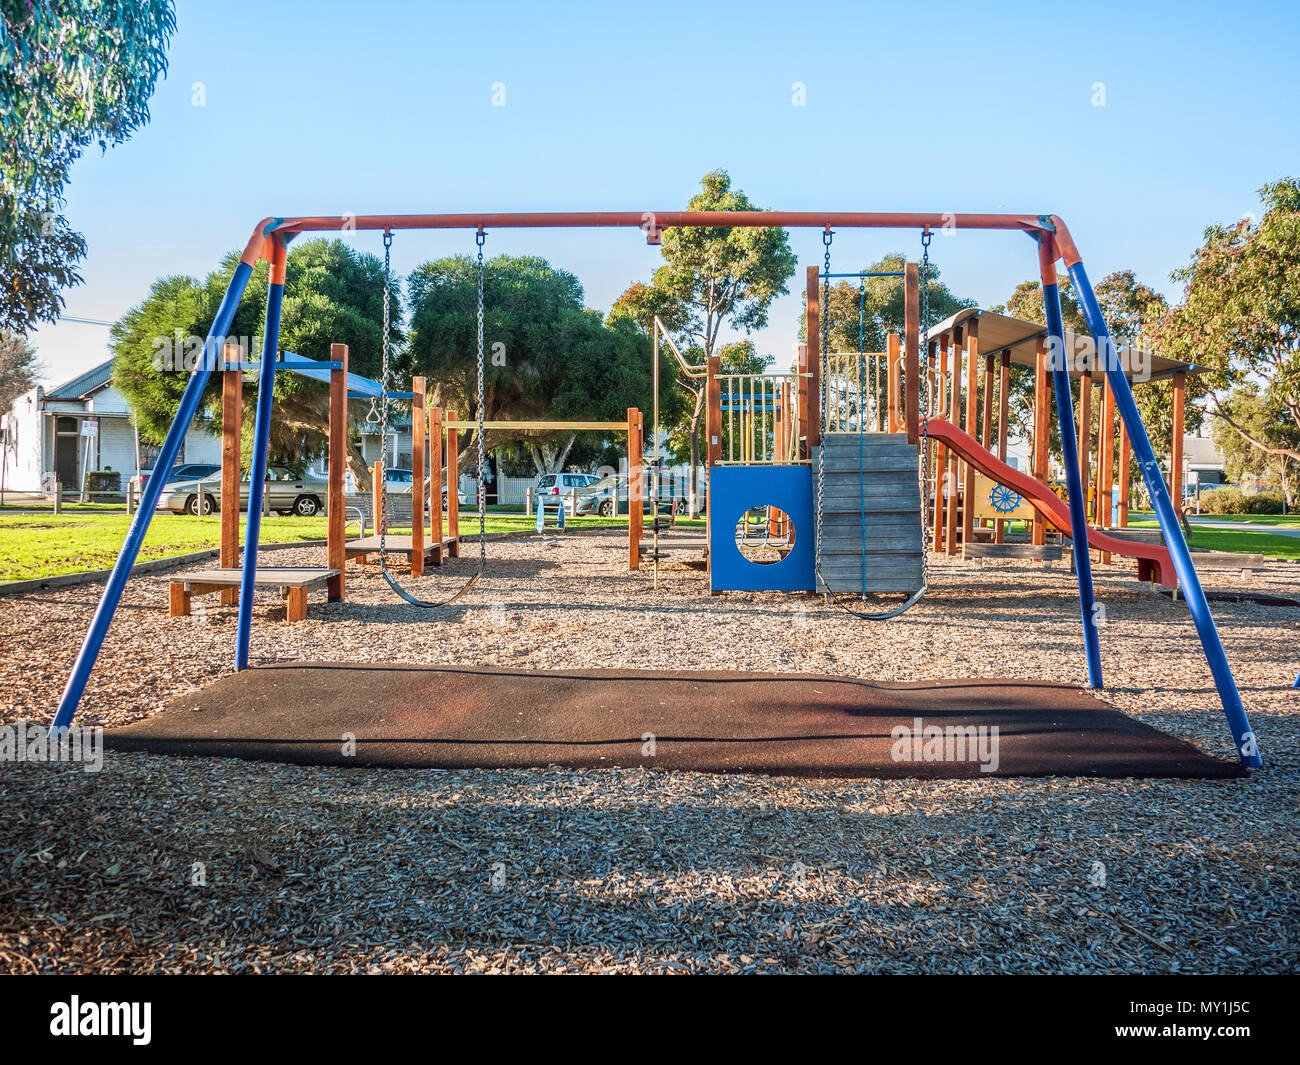 Recreational equipments at a children's playground in Melbourne's residential neighbourhood. Footscray, VIC Australia Stock Photo